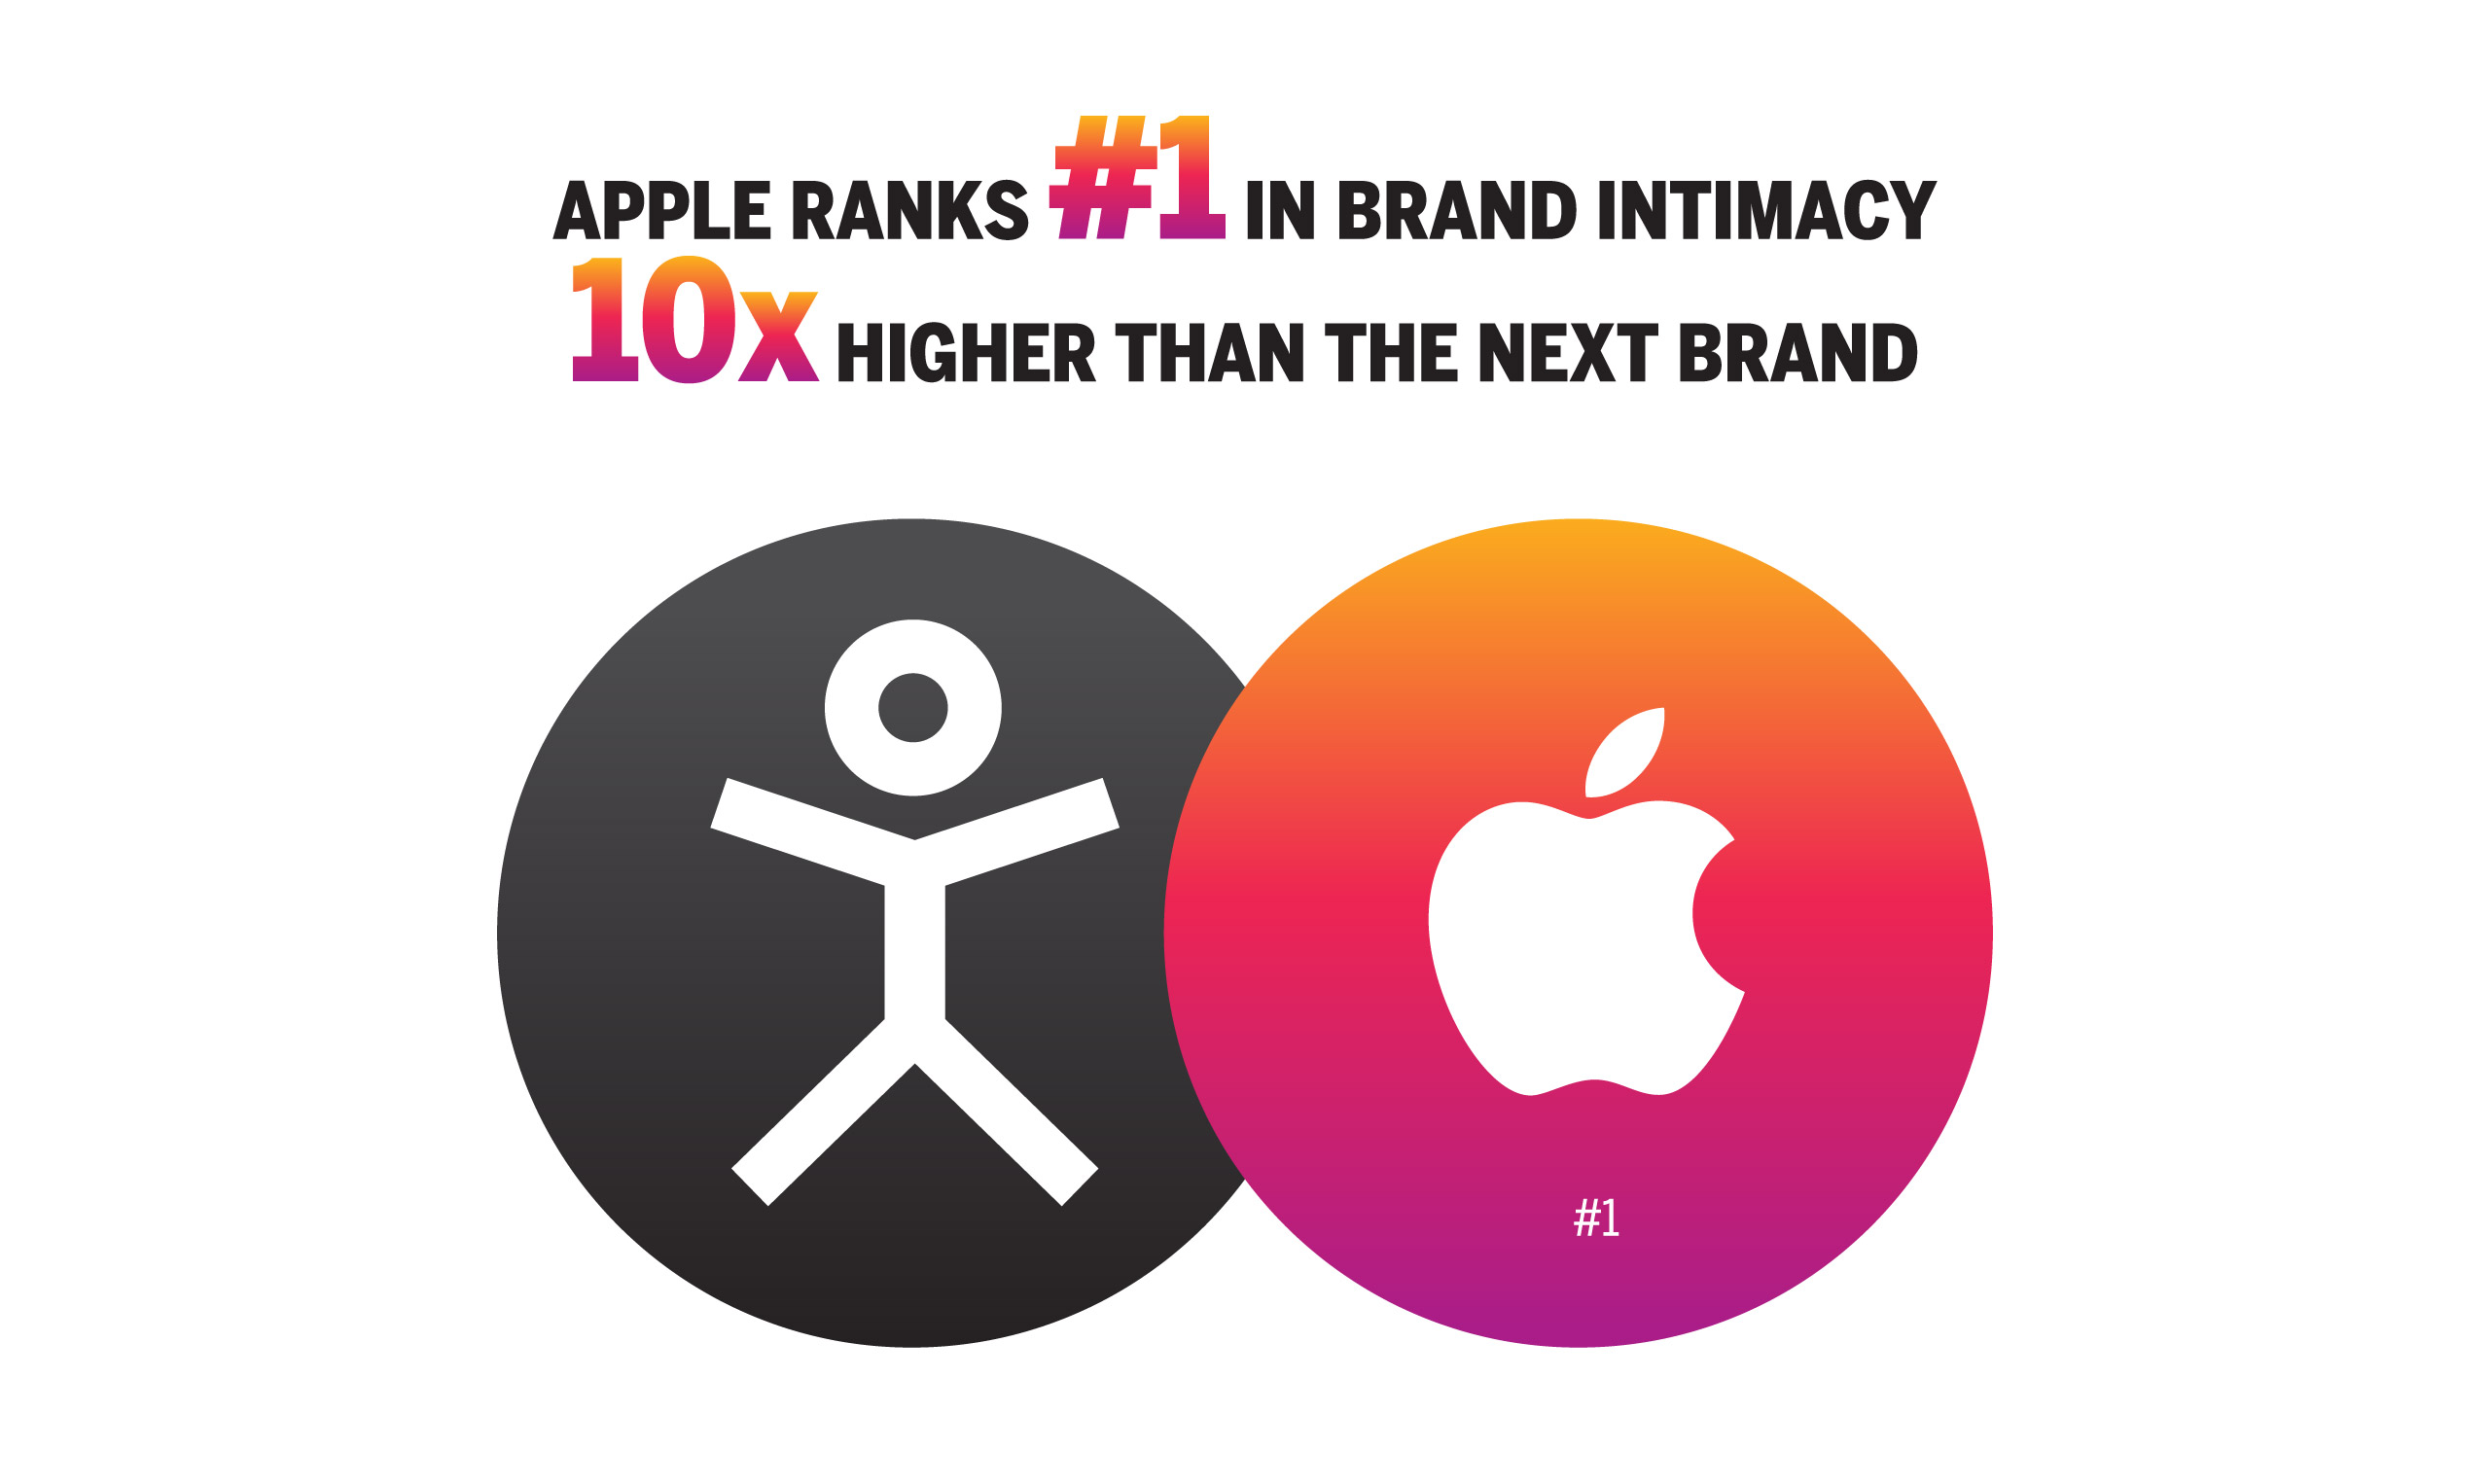 Apple ranks in brand intimacy 10 higher than the next brand.